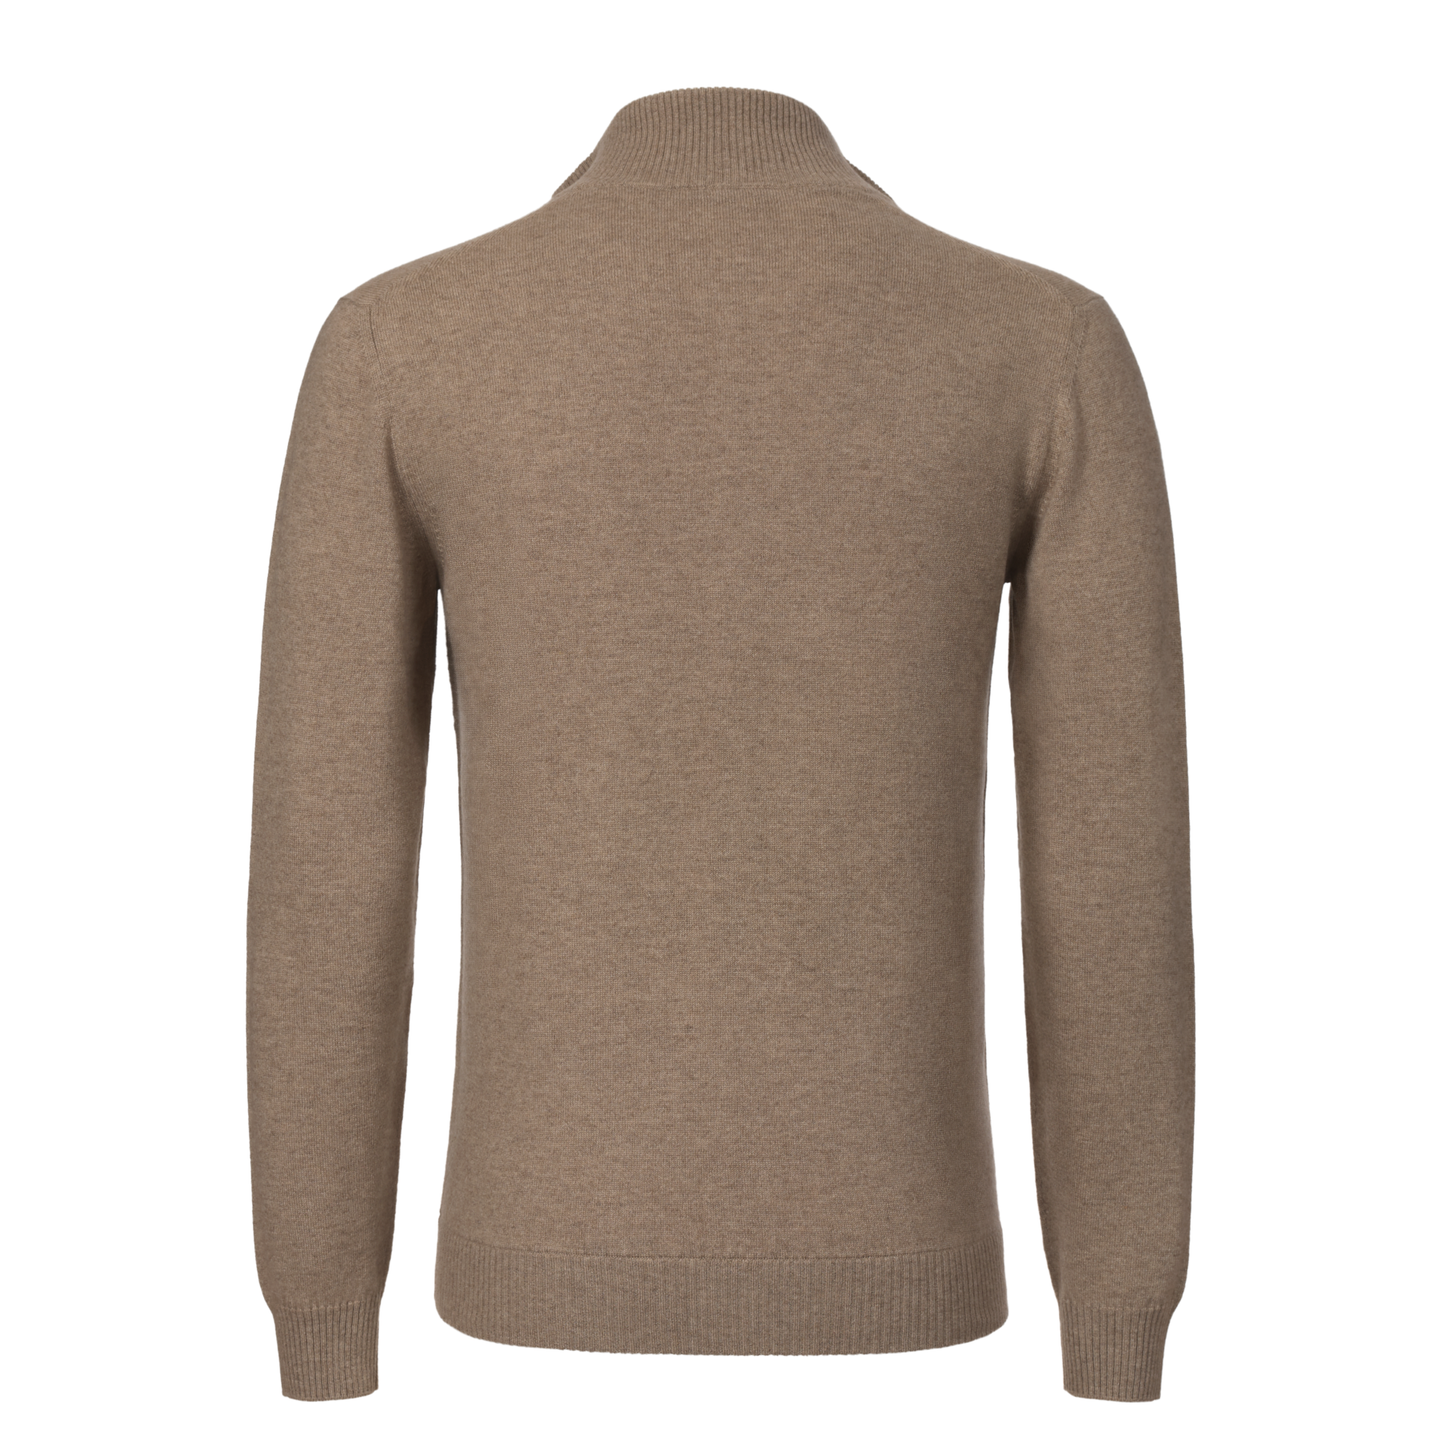 Cashmere Zip-Up Sweater in Light Brown